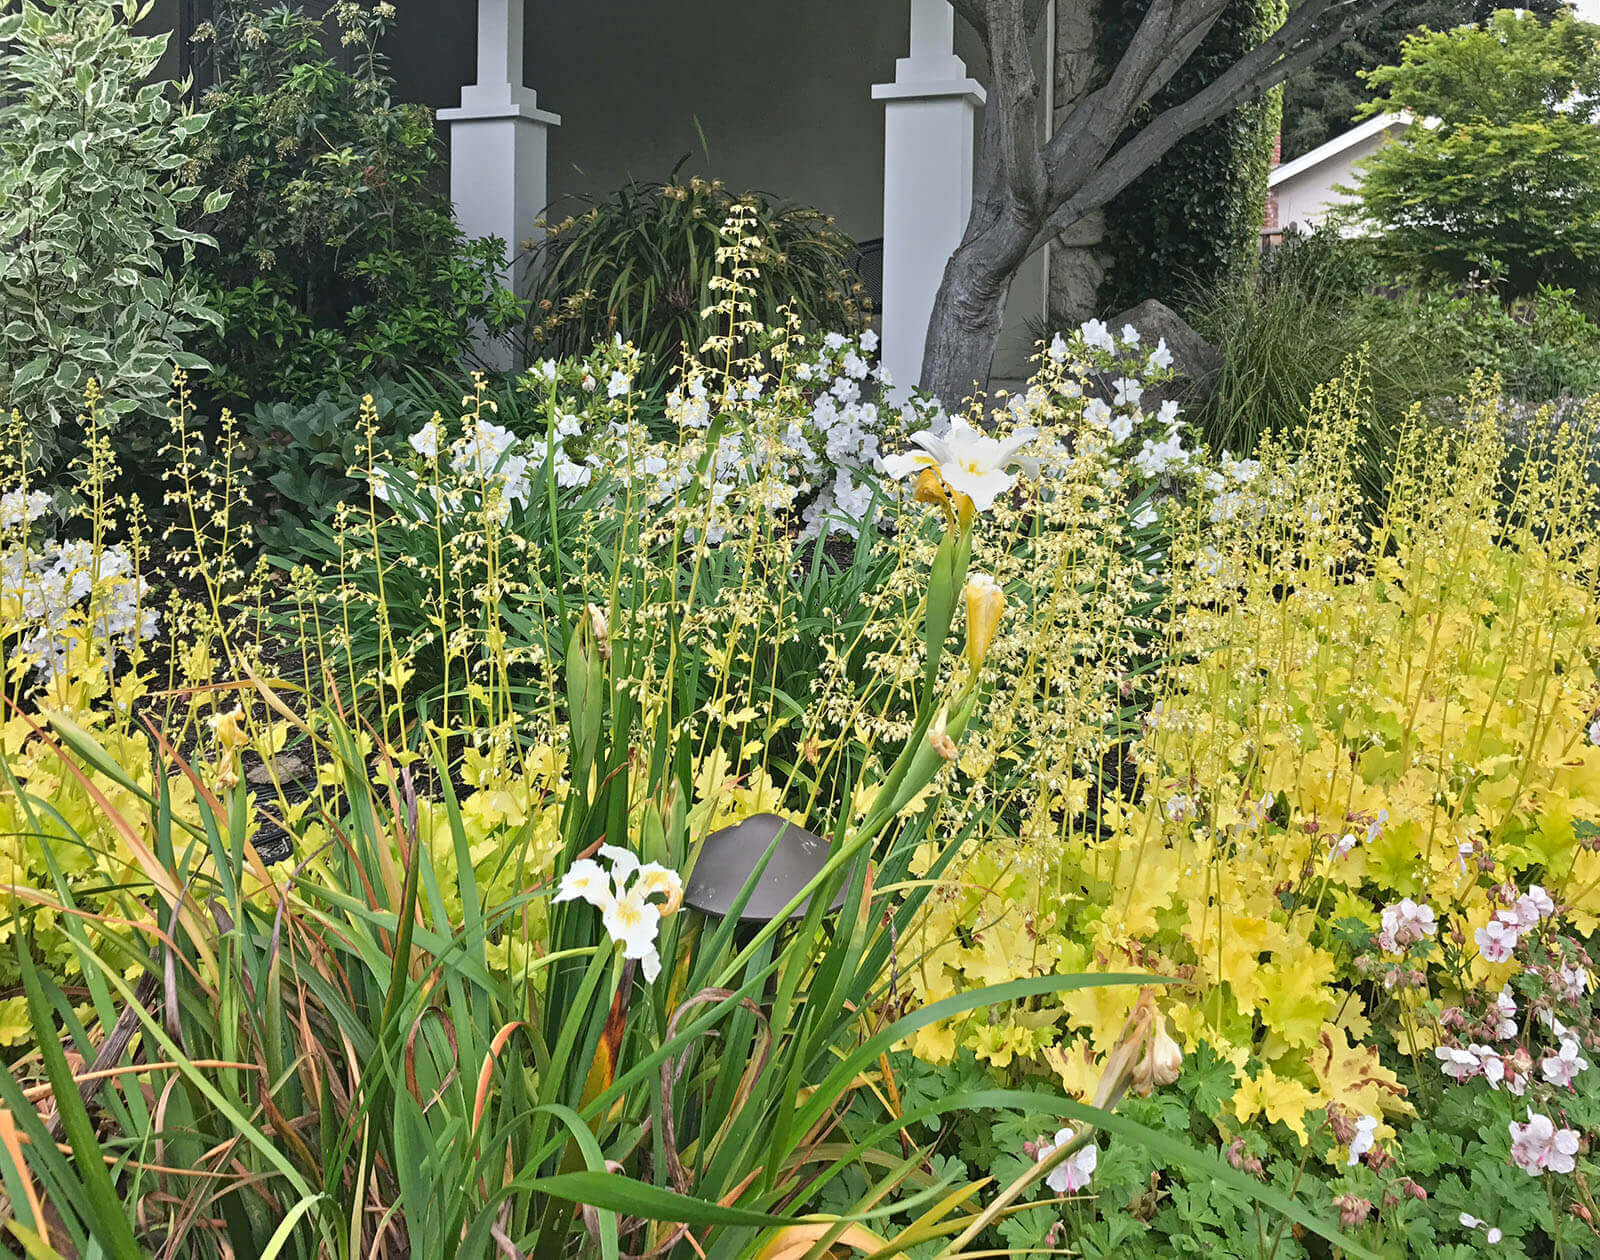 Diverse white flowers and yellow-green flowering plants in a garden bed under a tree